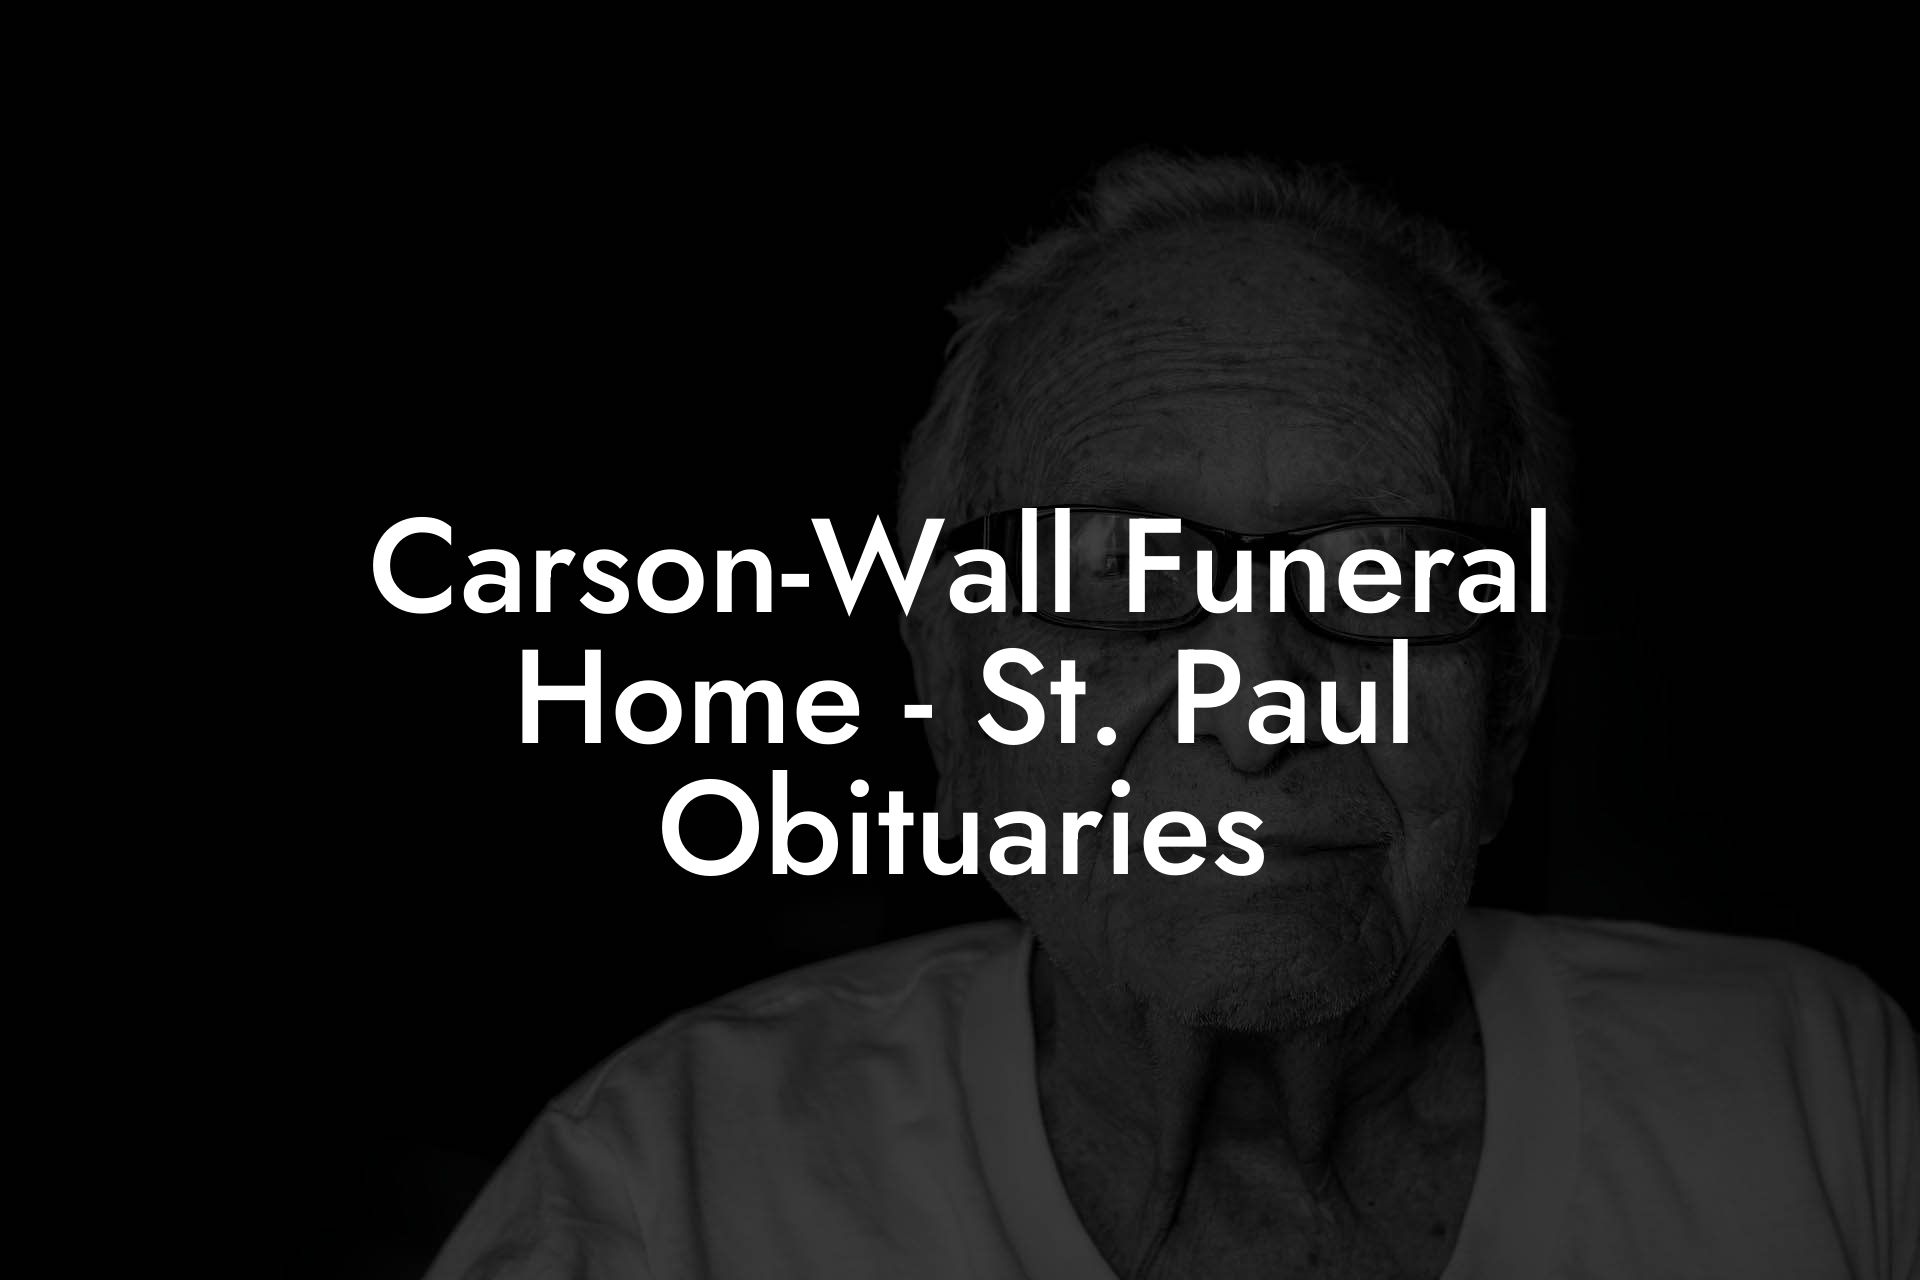 Carson-Wall Funeral Home - St. Paul Obituaries